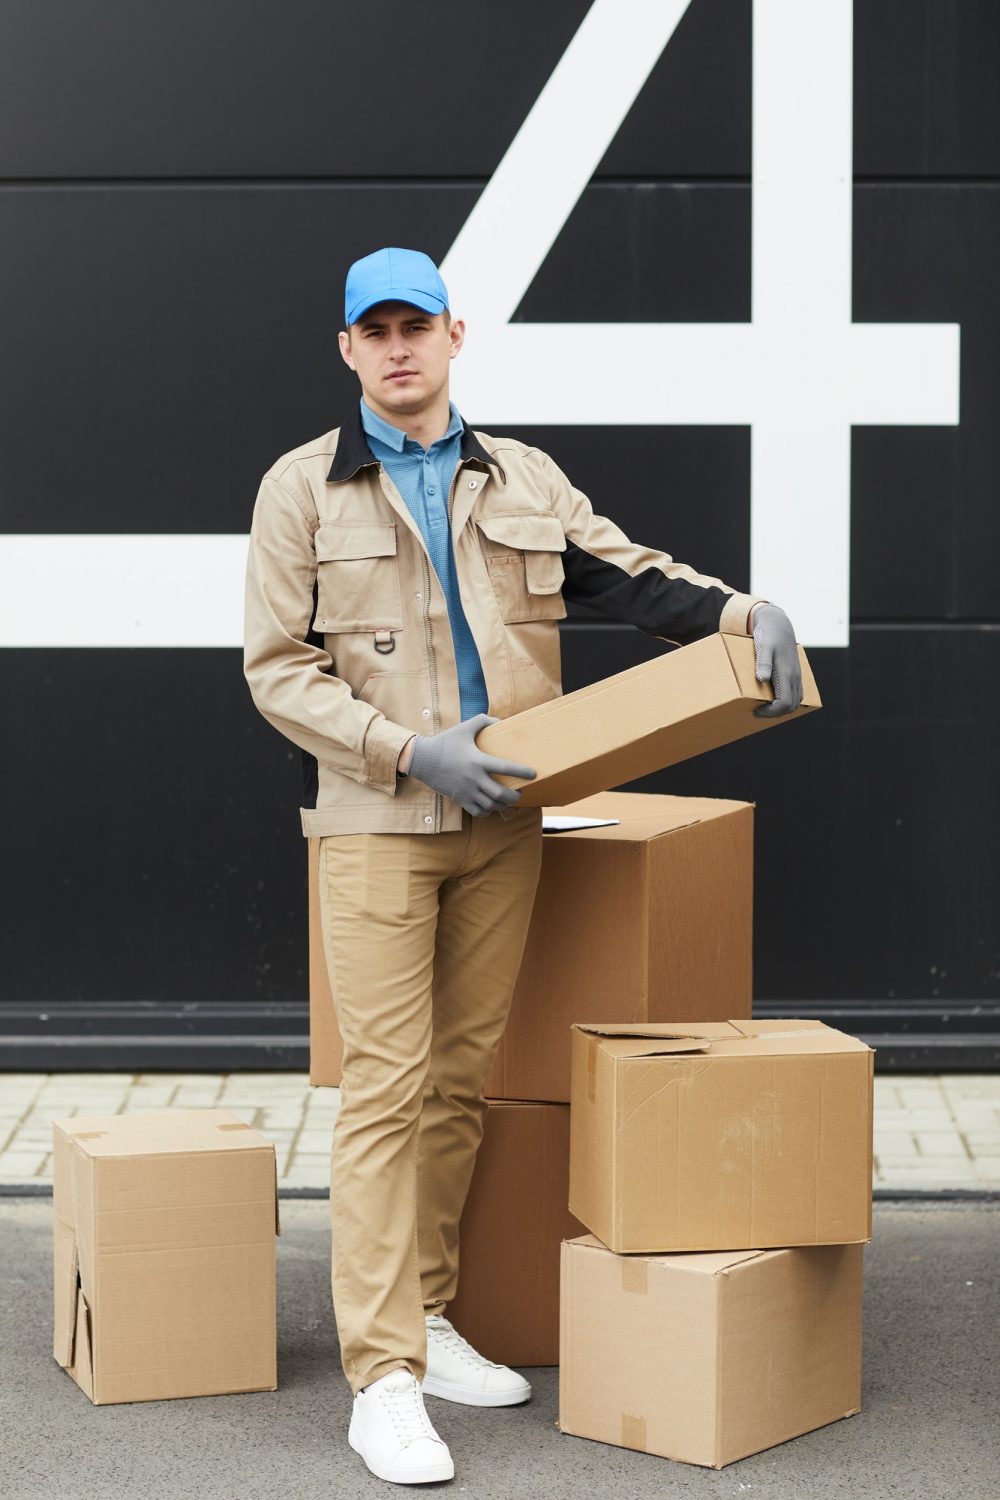 Courier working with parcels in warehouse